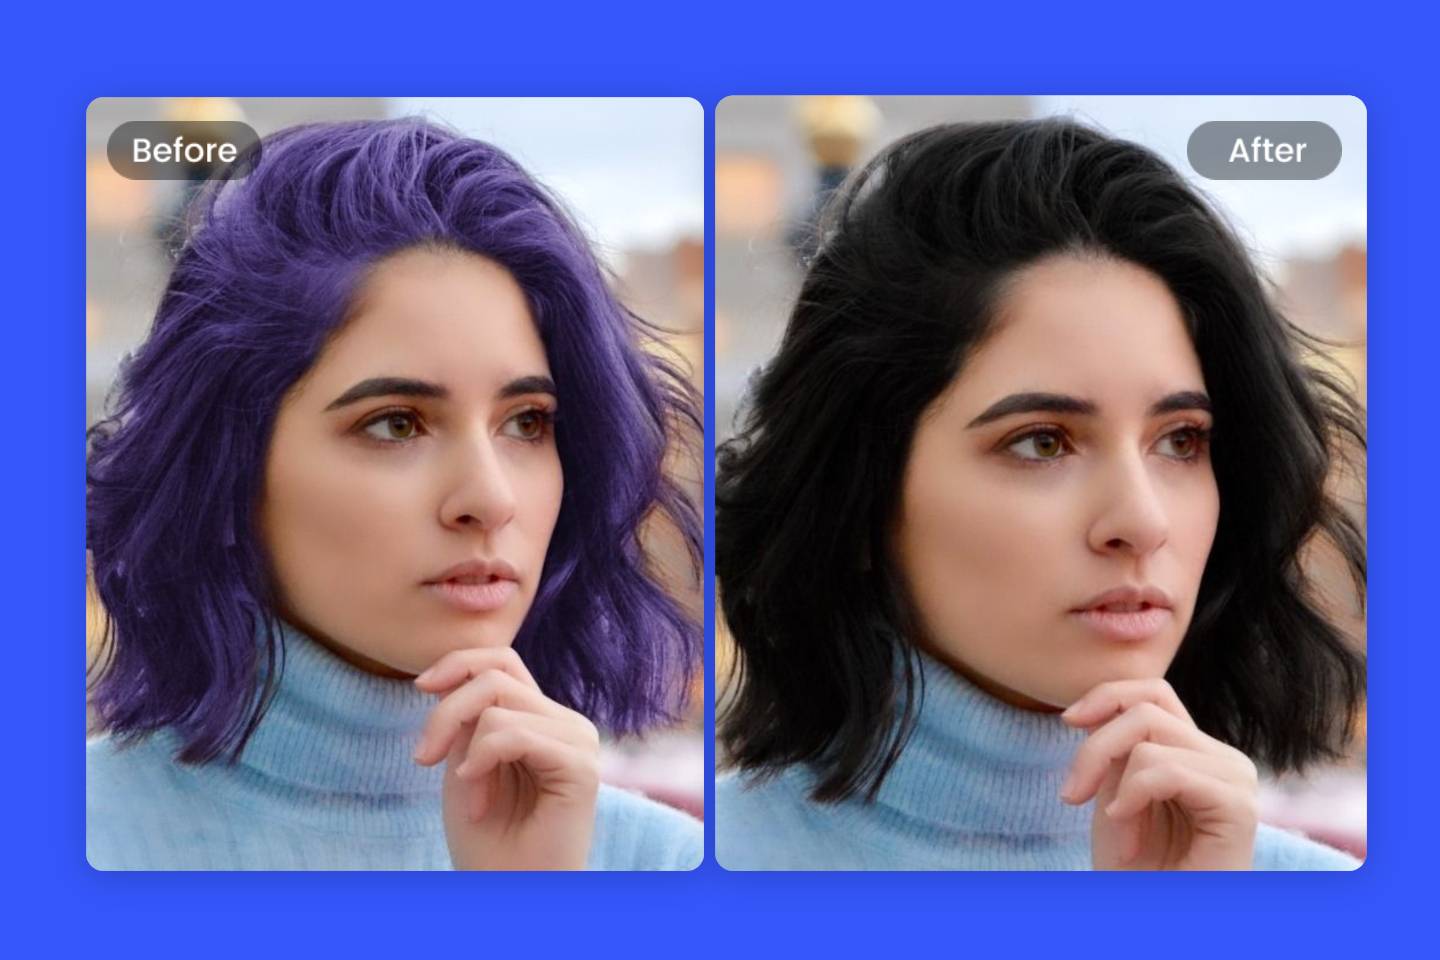 https://imgv3.fotor.com/images/share/turn-a-purple-hair-woman-into-black-hair-with-fotor-black-hair-filter.jpg